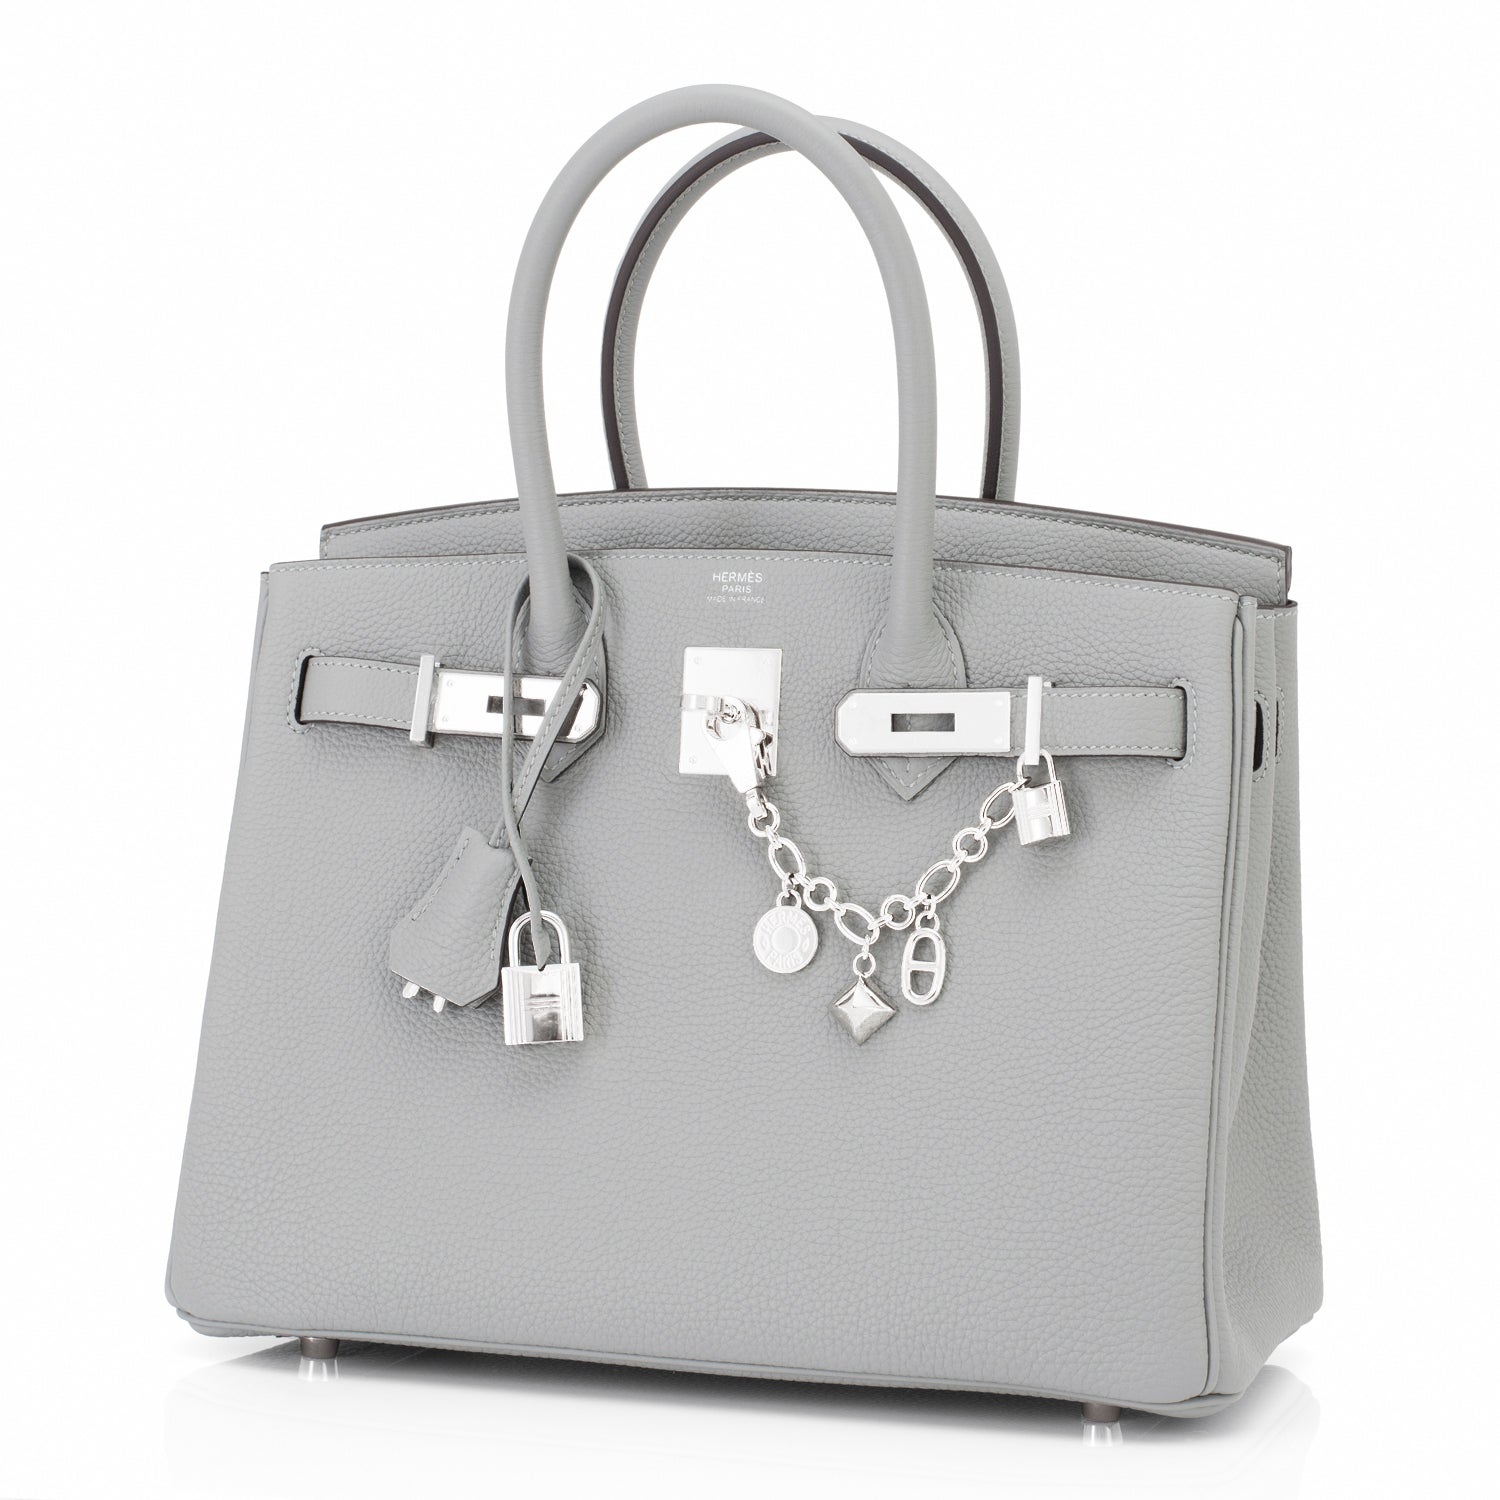 Birkin 25 in Gris Mouette Togo leather with Silver hardware